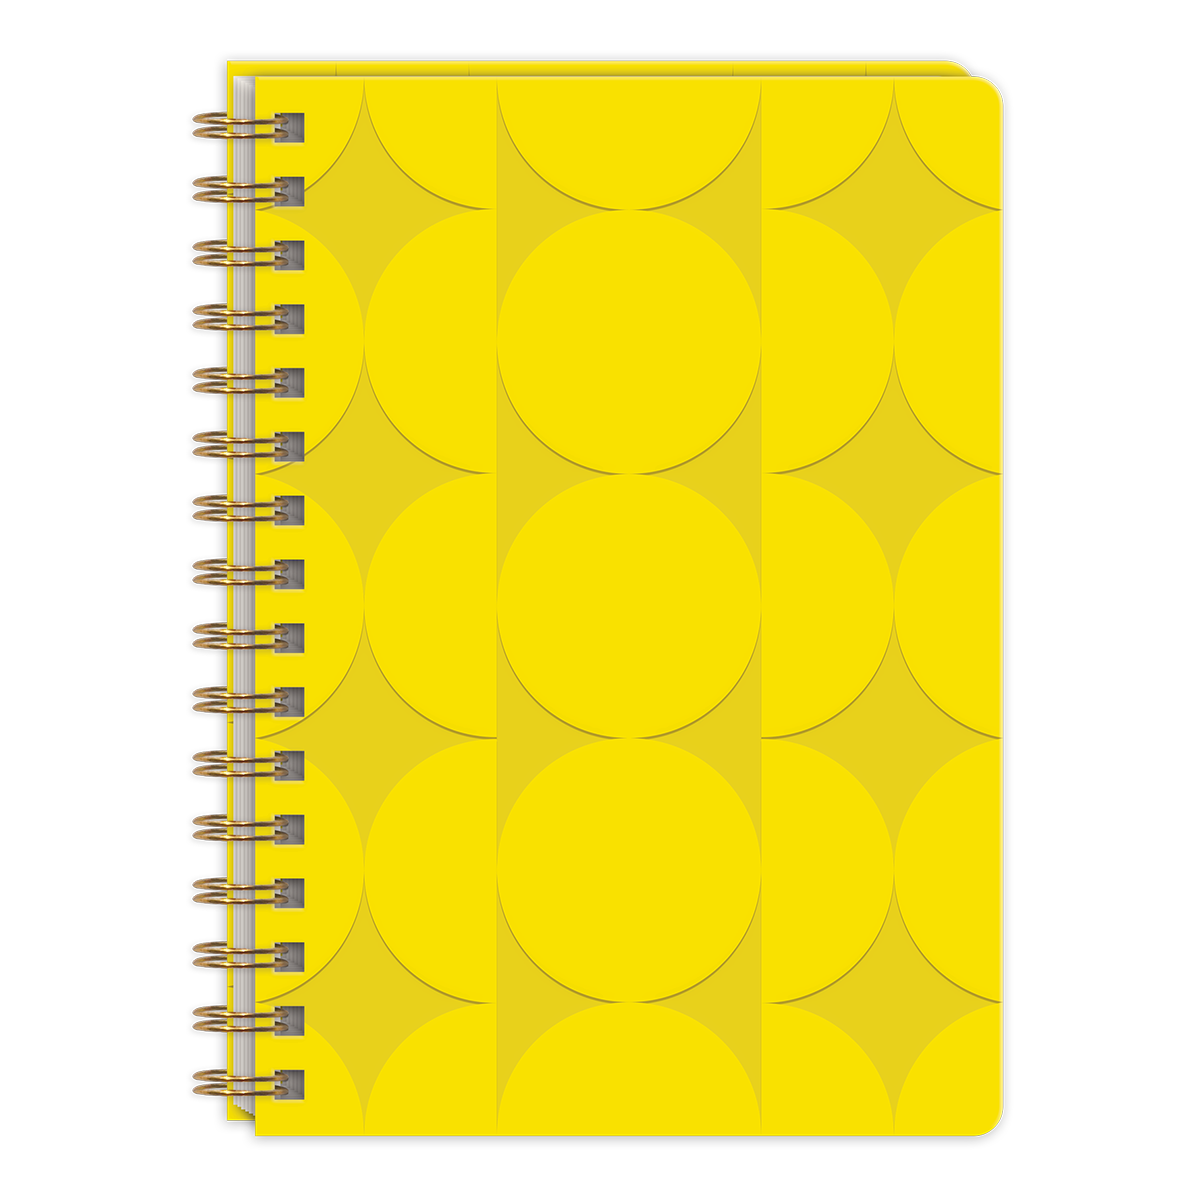 Statement Shapes Yellow Spiral Journal Product